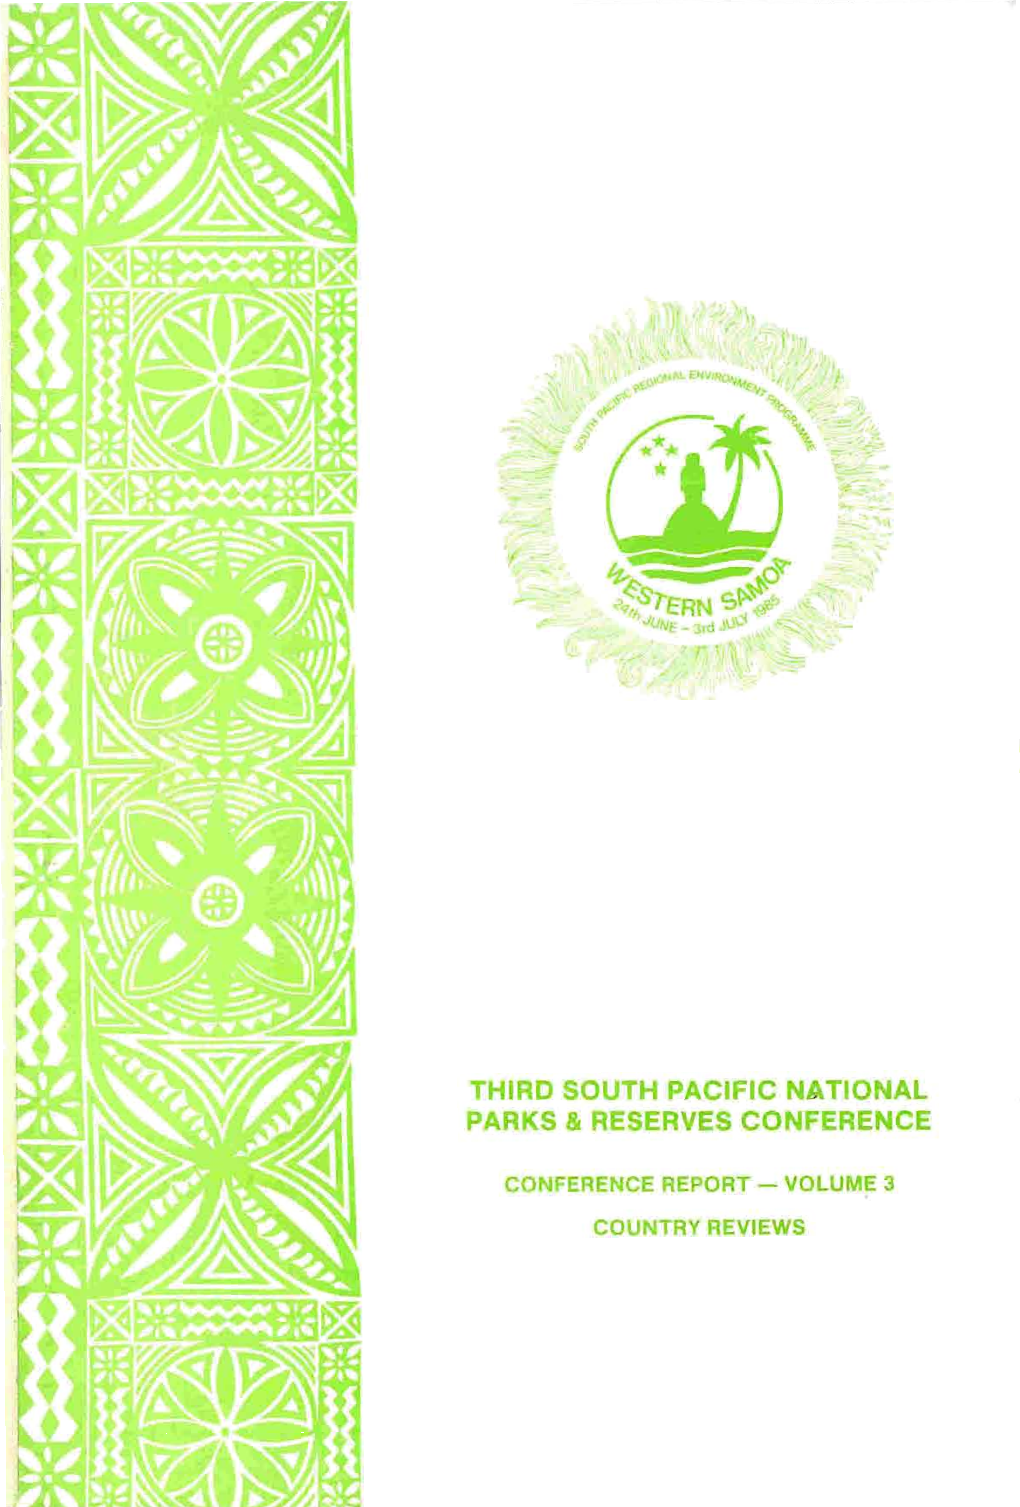 Third South Pacific Natiohal Parks & Reserves Conference